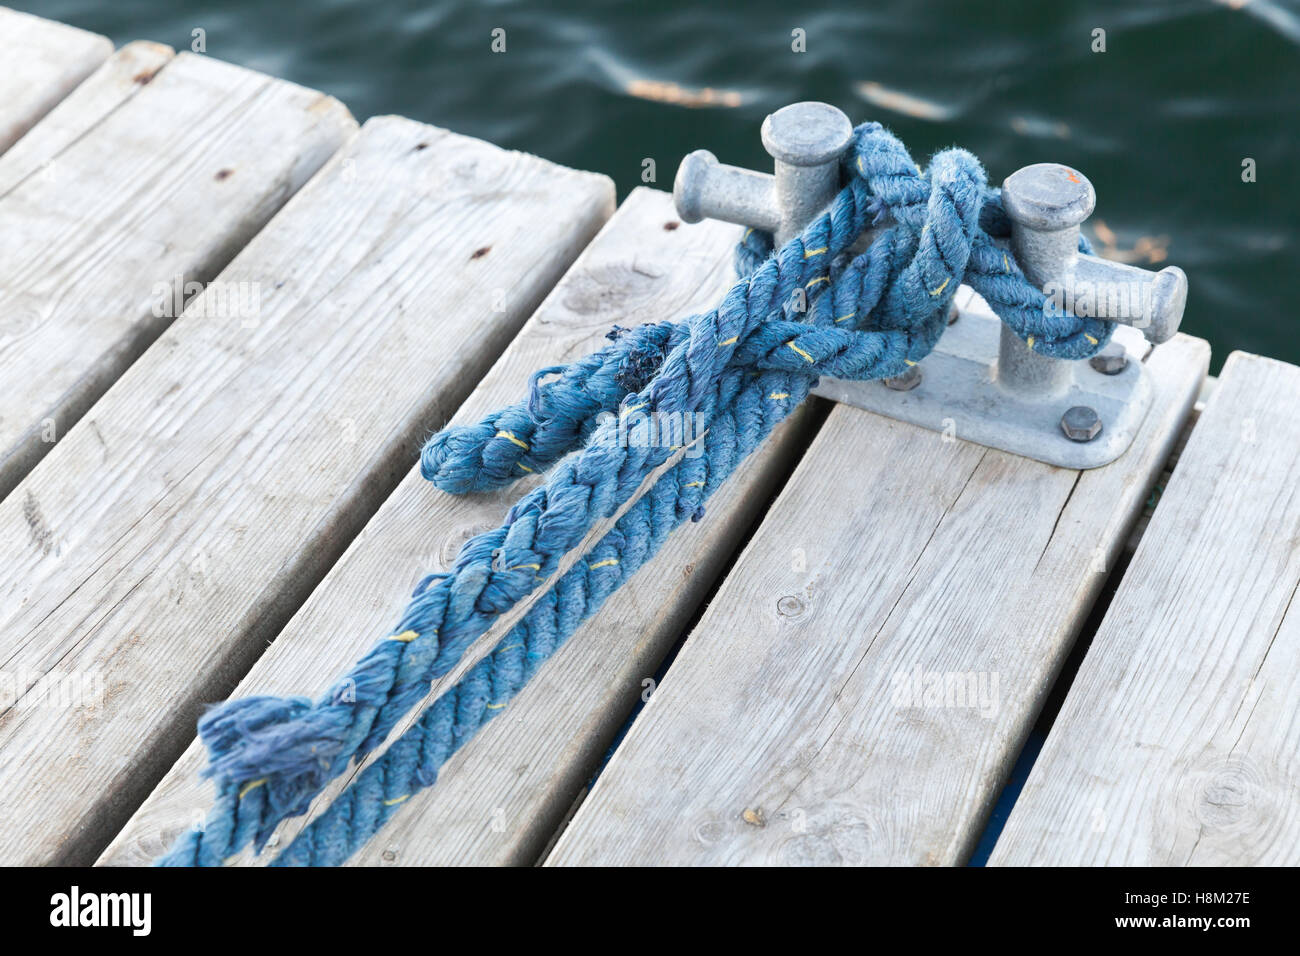 Mooring bollard with tied blue nautical rope mounted on white wooden pier, yacht marina safety equipment Stock Photo